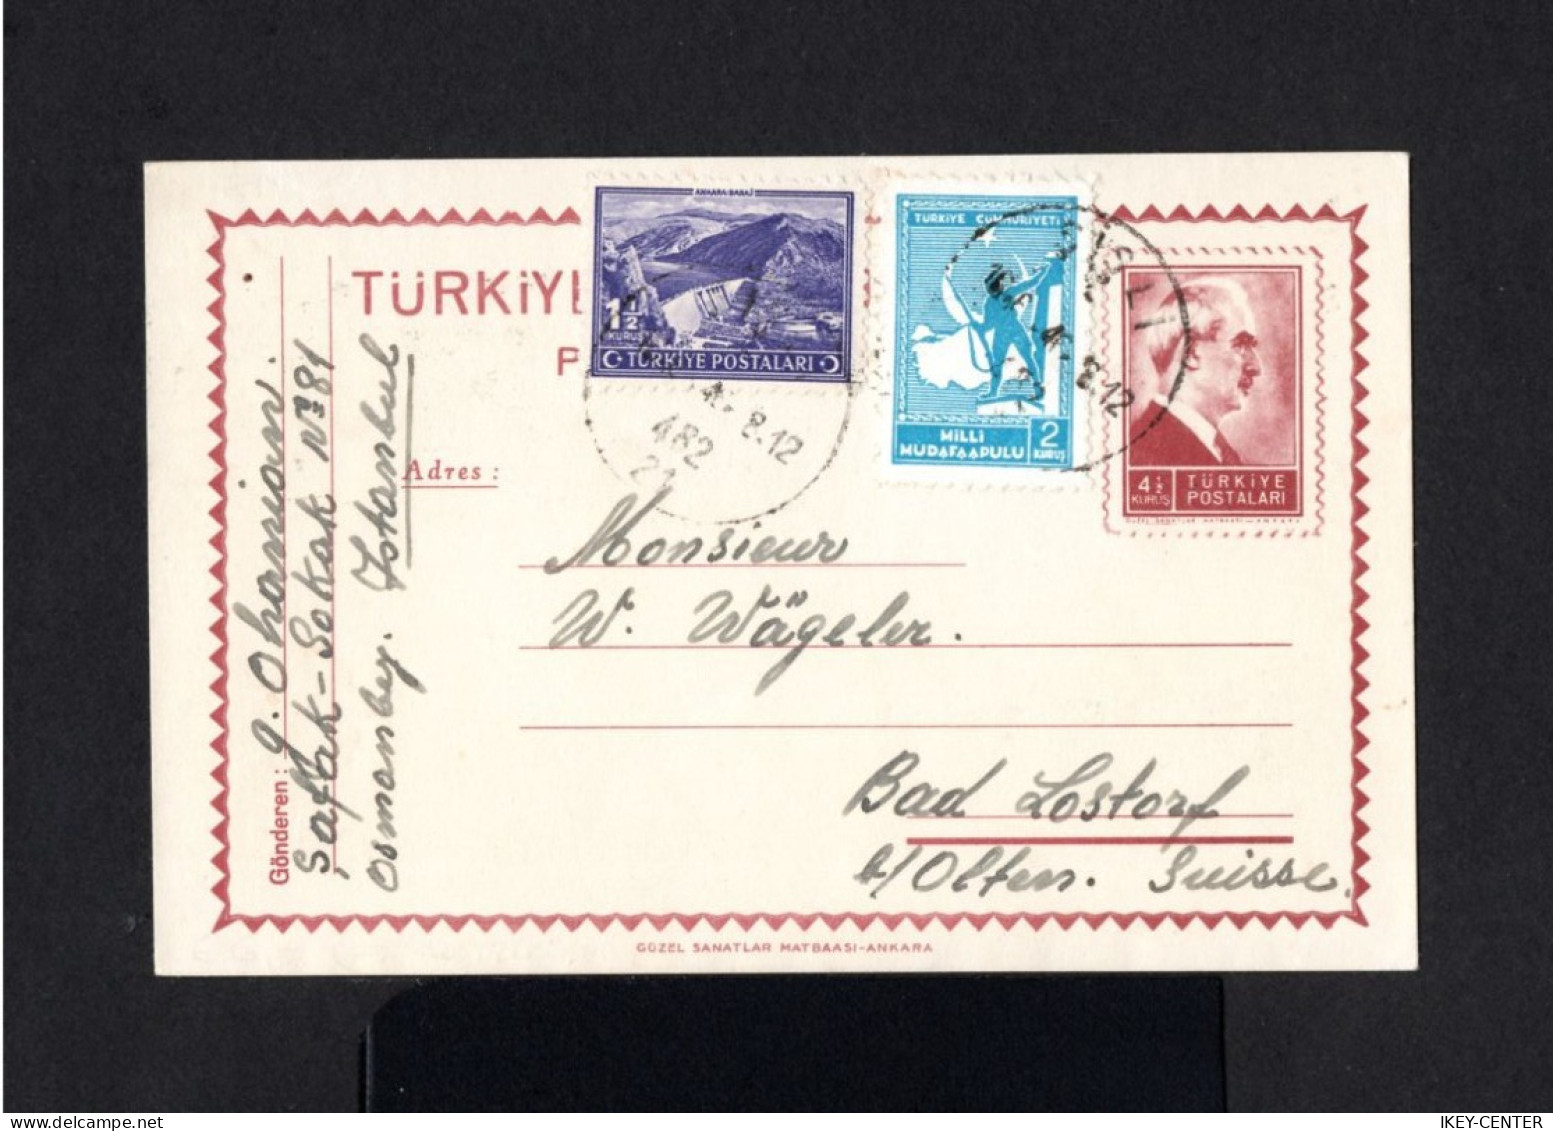 S4344-TURKEY-OLD OTTOMAN POSTCARD ISTANBUL To OLTEN (switzerland) 1946.WWII.Carte Postale TURQUIE - Covers & Documents